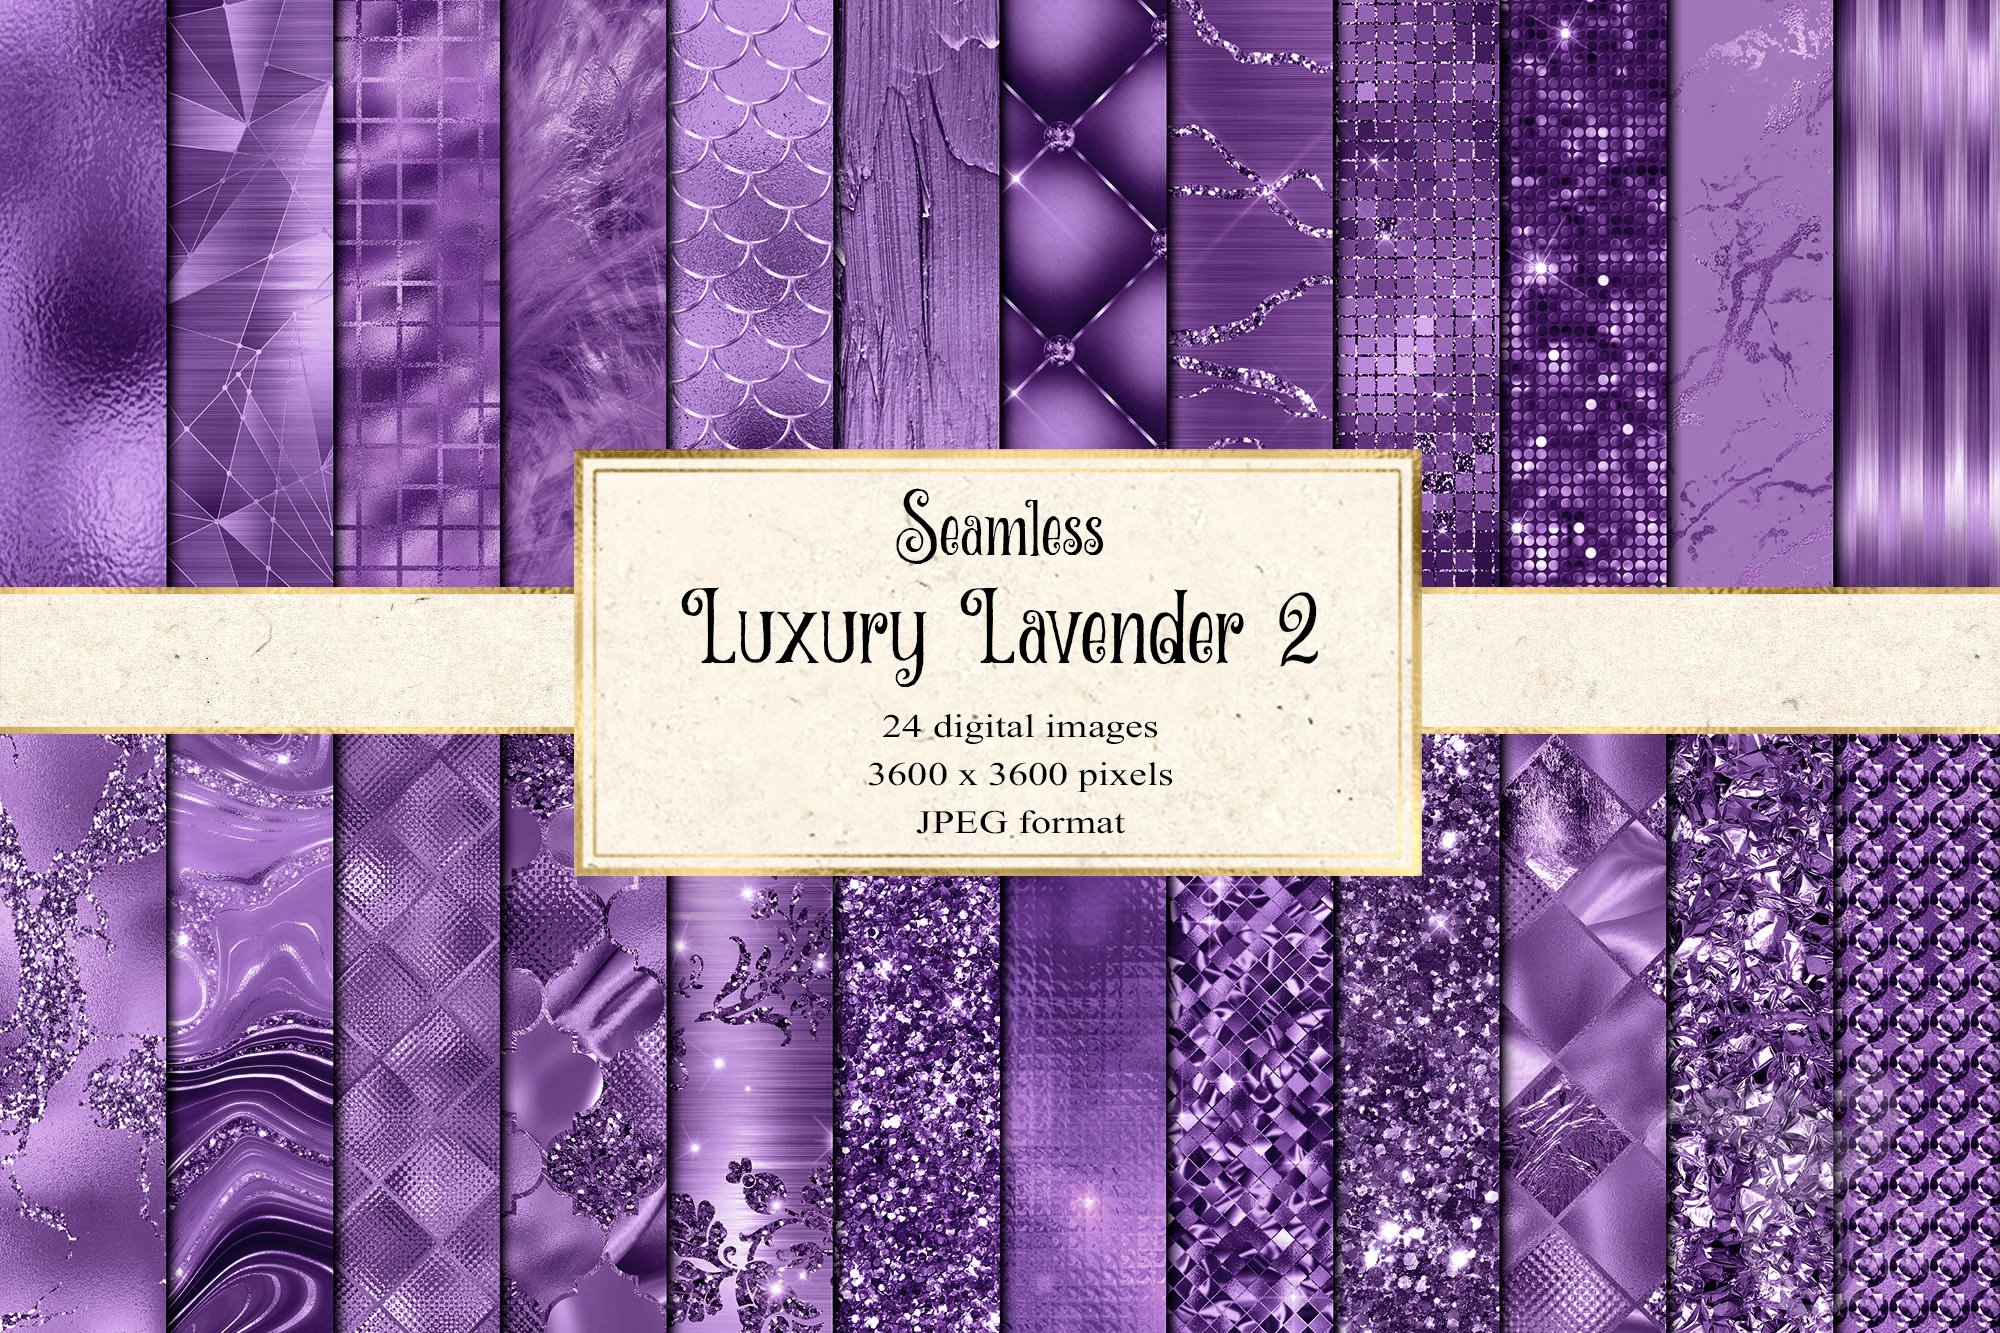 Luxury Lavender Textures cover image.